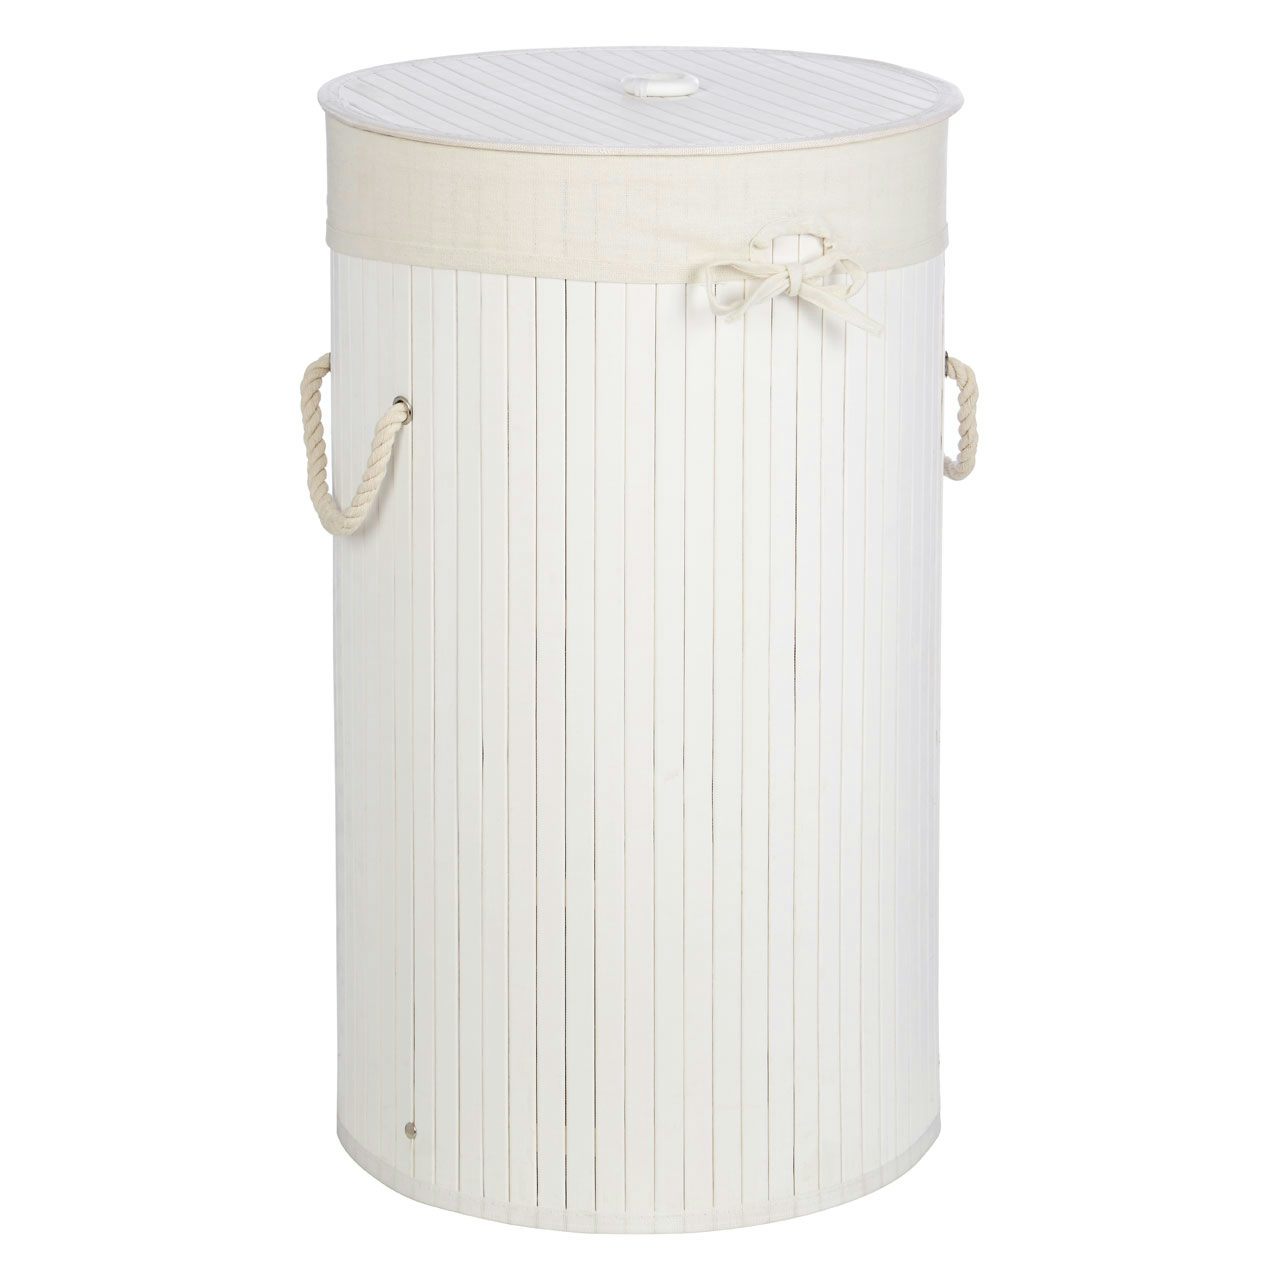 Accents Natural bamboo white round laundry basket